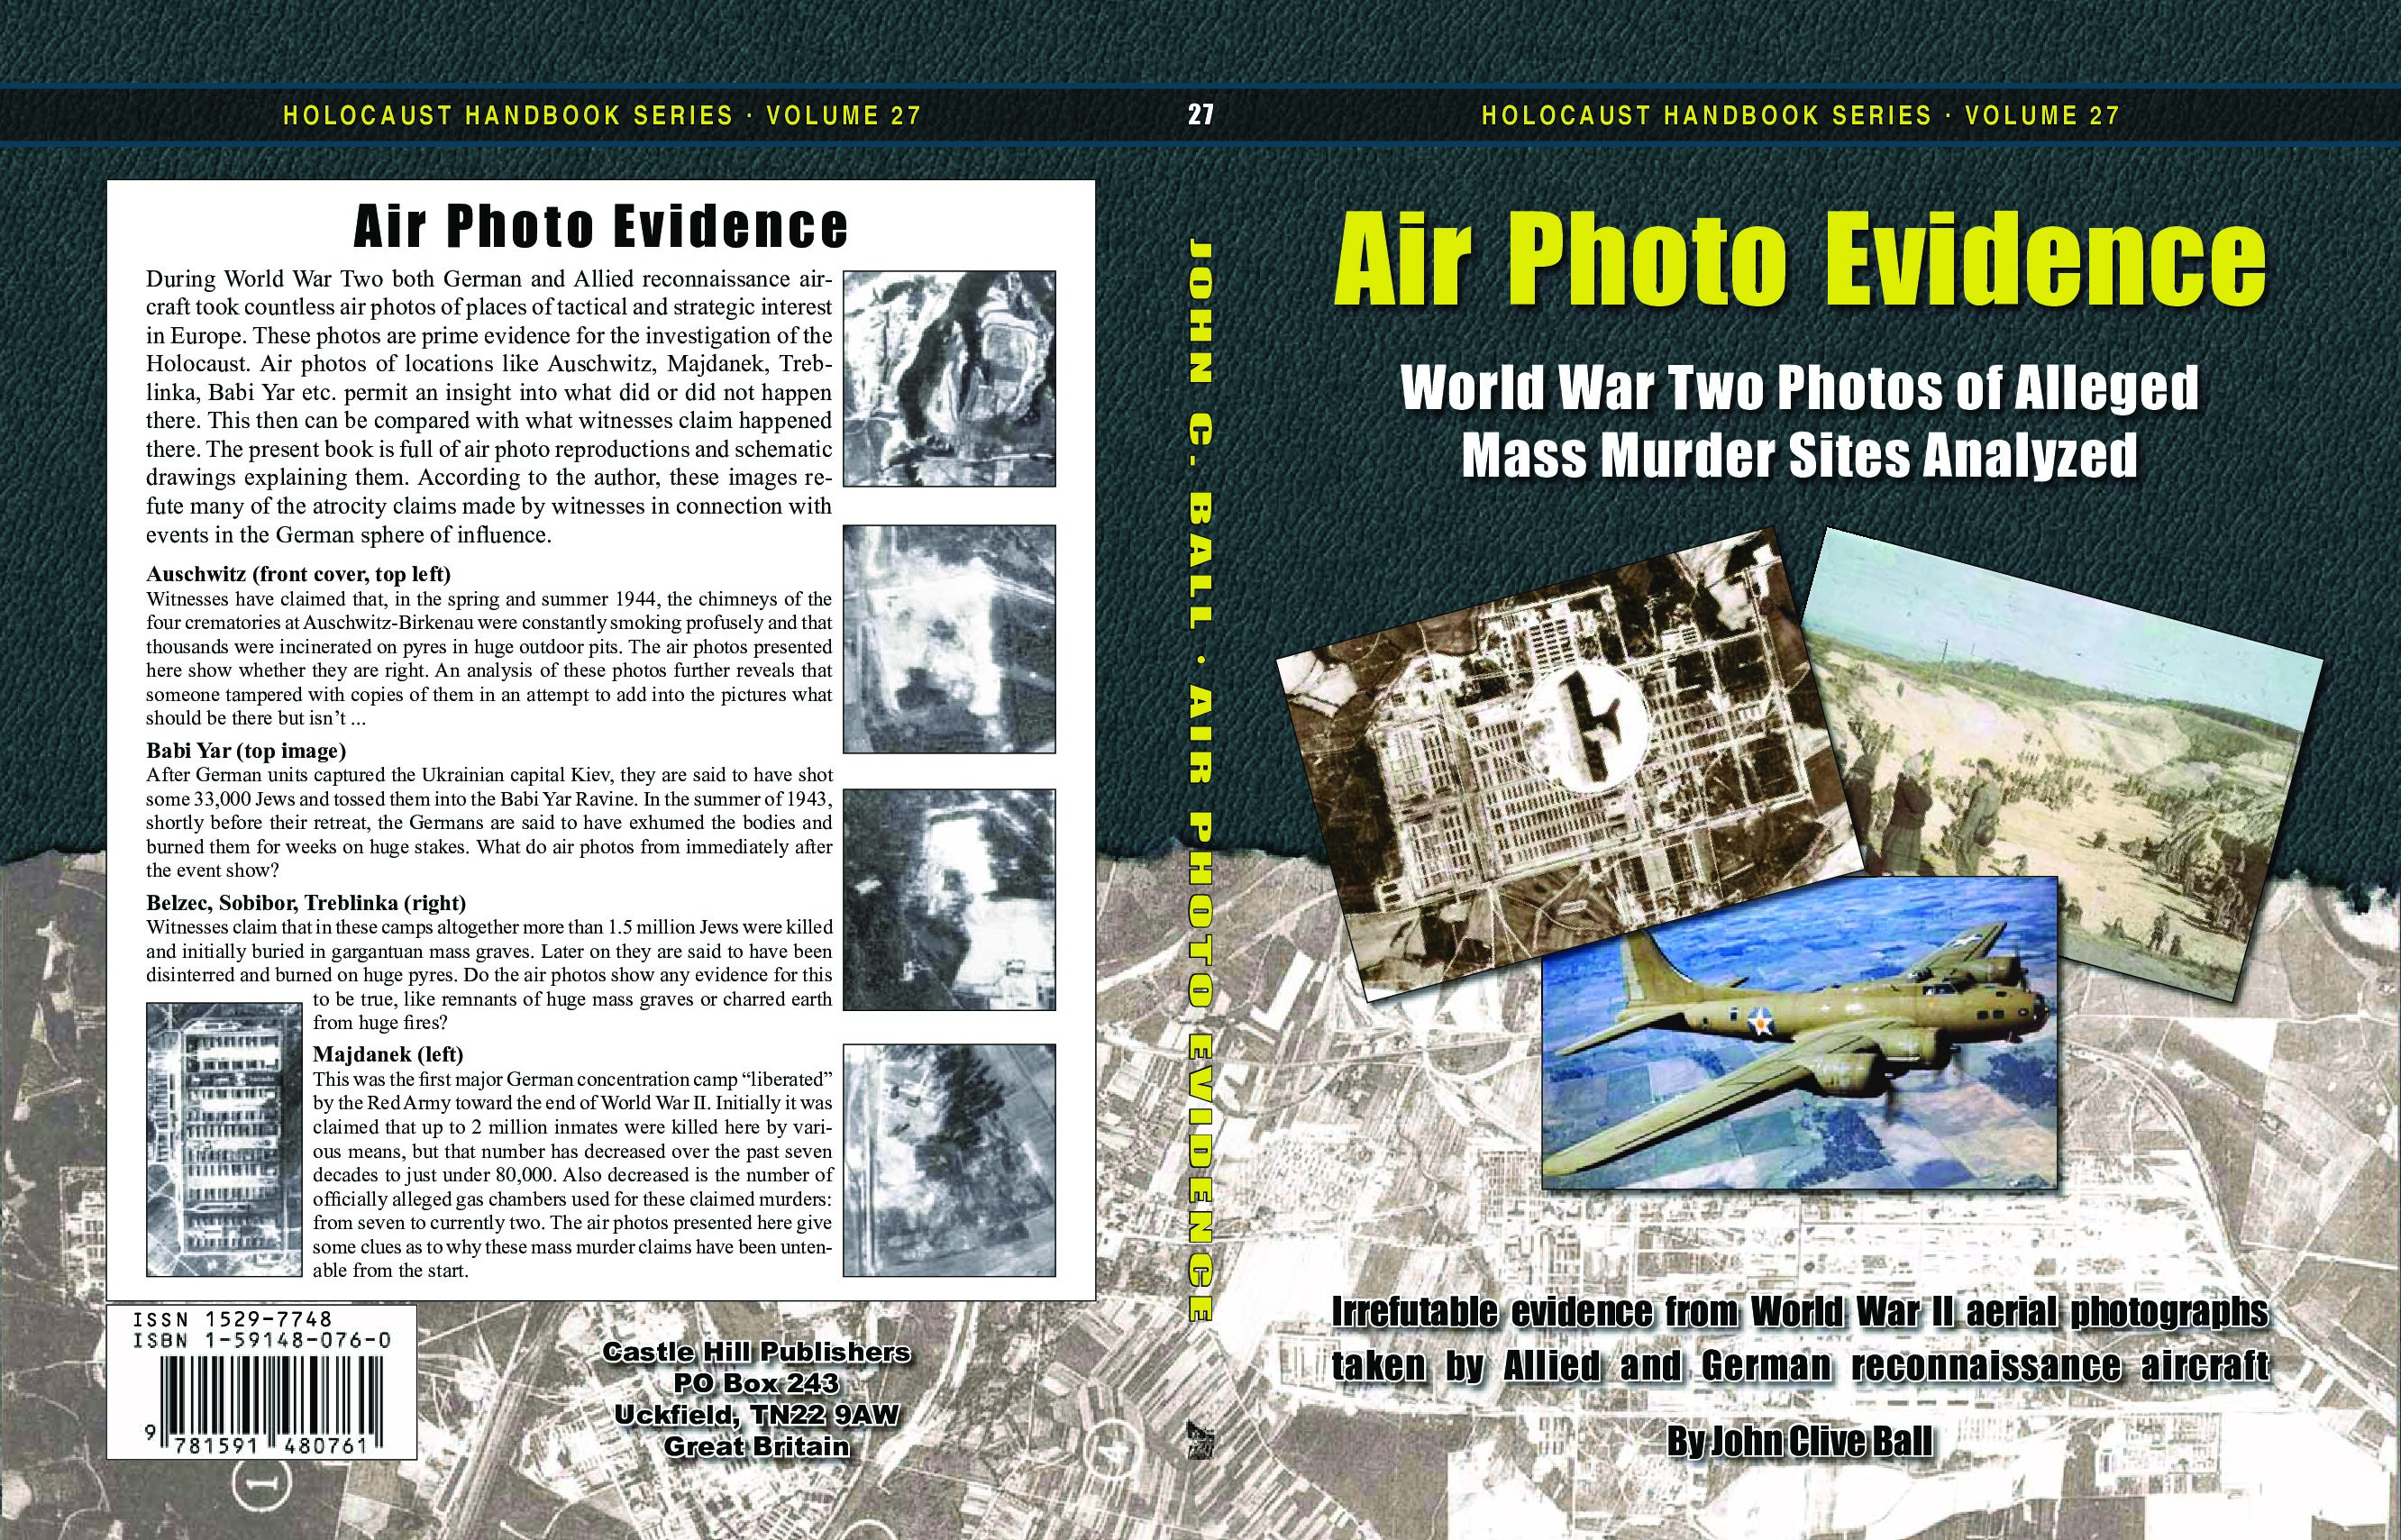 27 - Ball, John Clive; Air Photo Evidence - World War Two Photos of Alleged Mass Murder Sites Analyzed